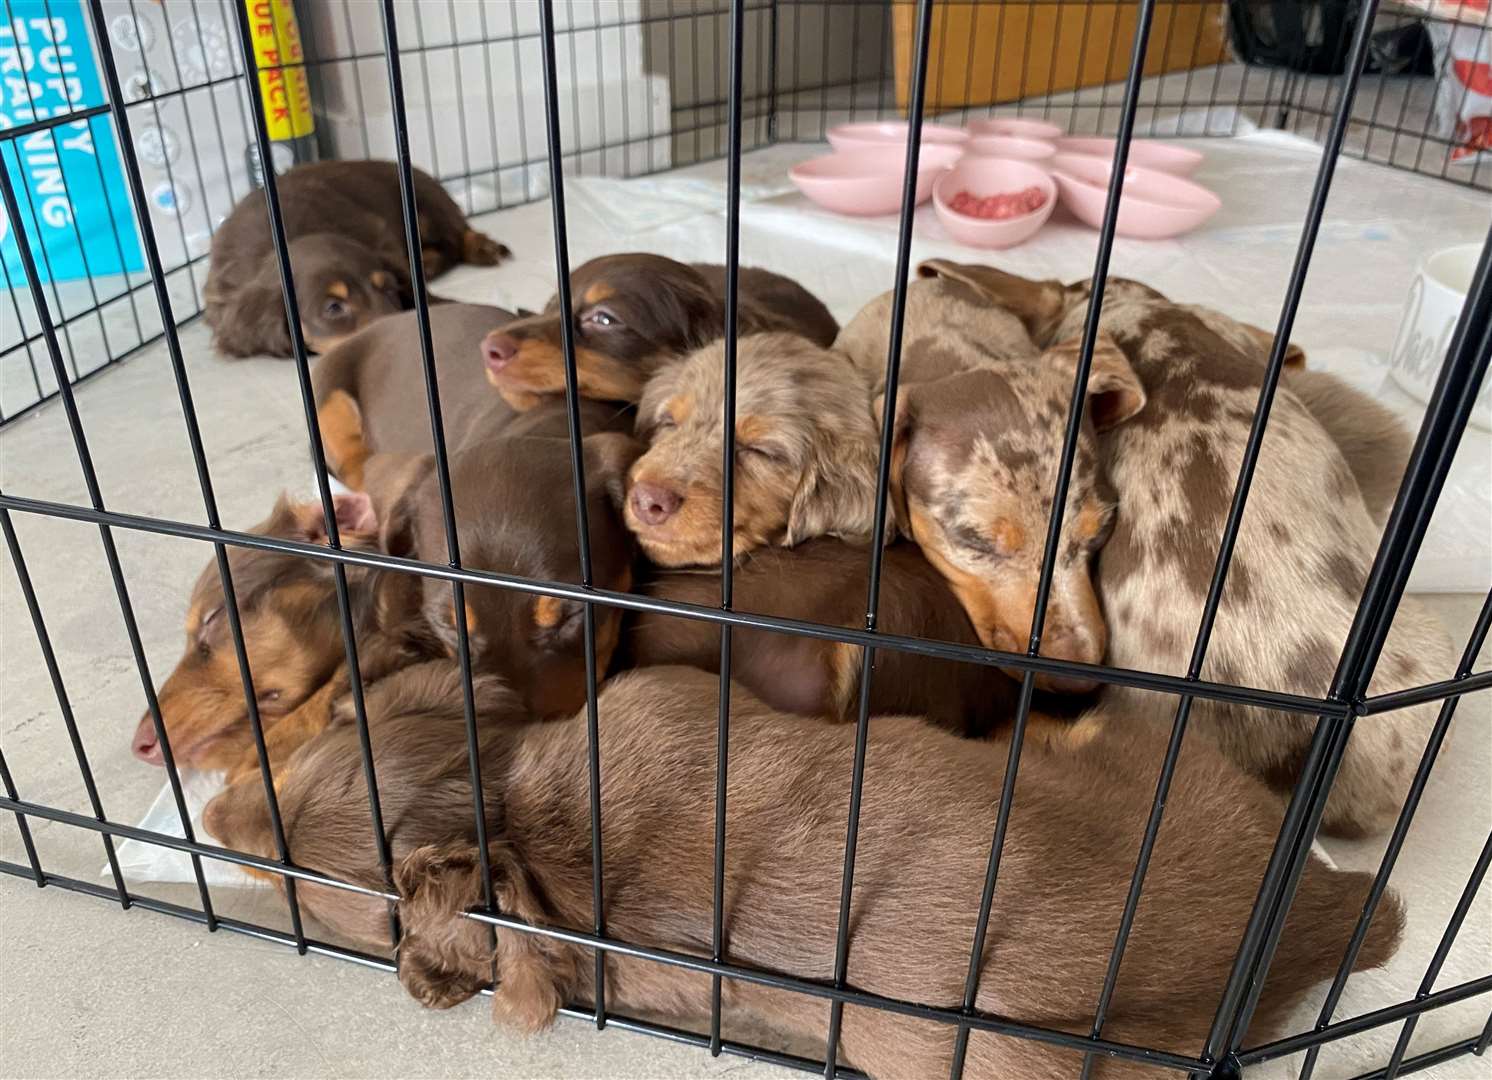 Most of the pups were tired out after the session